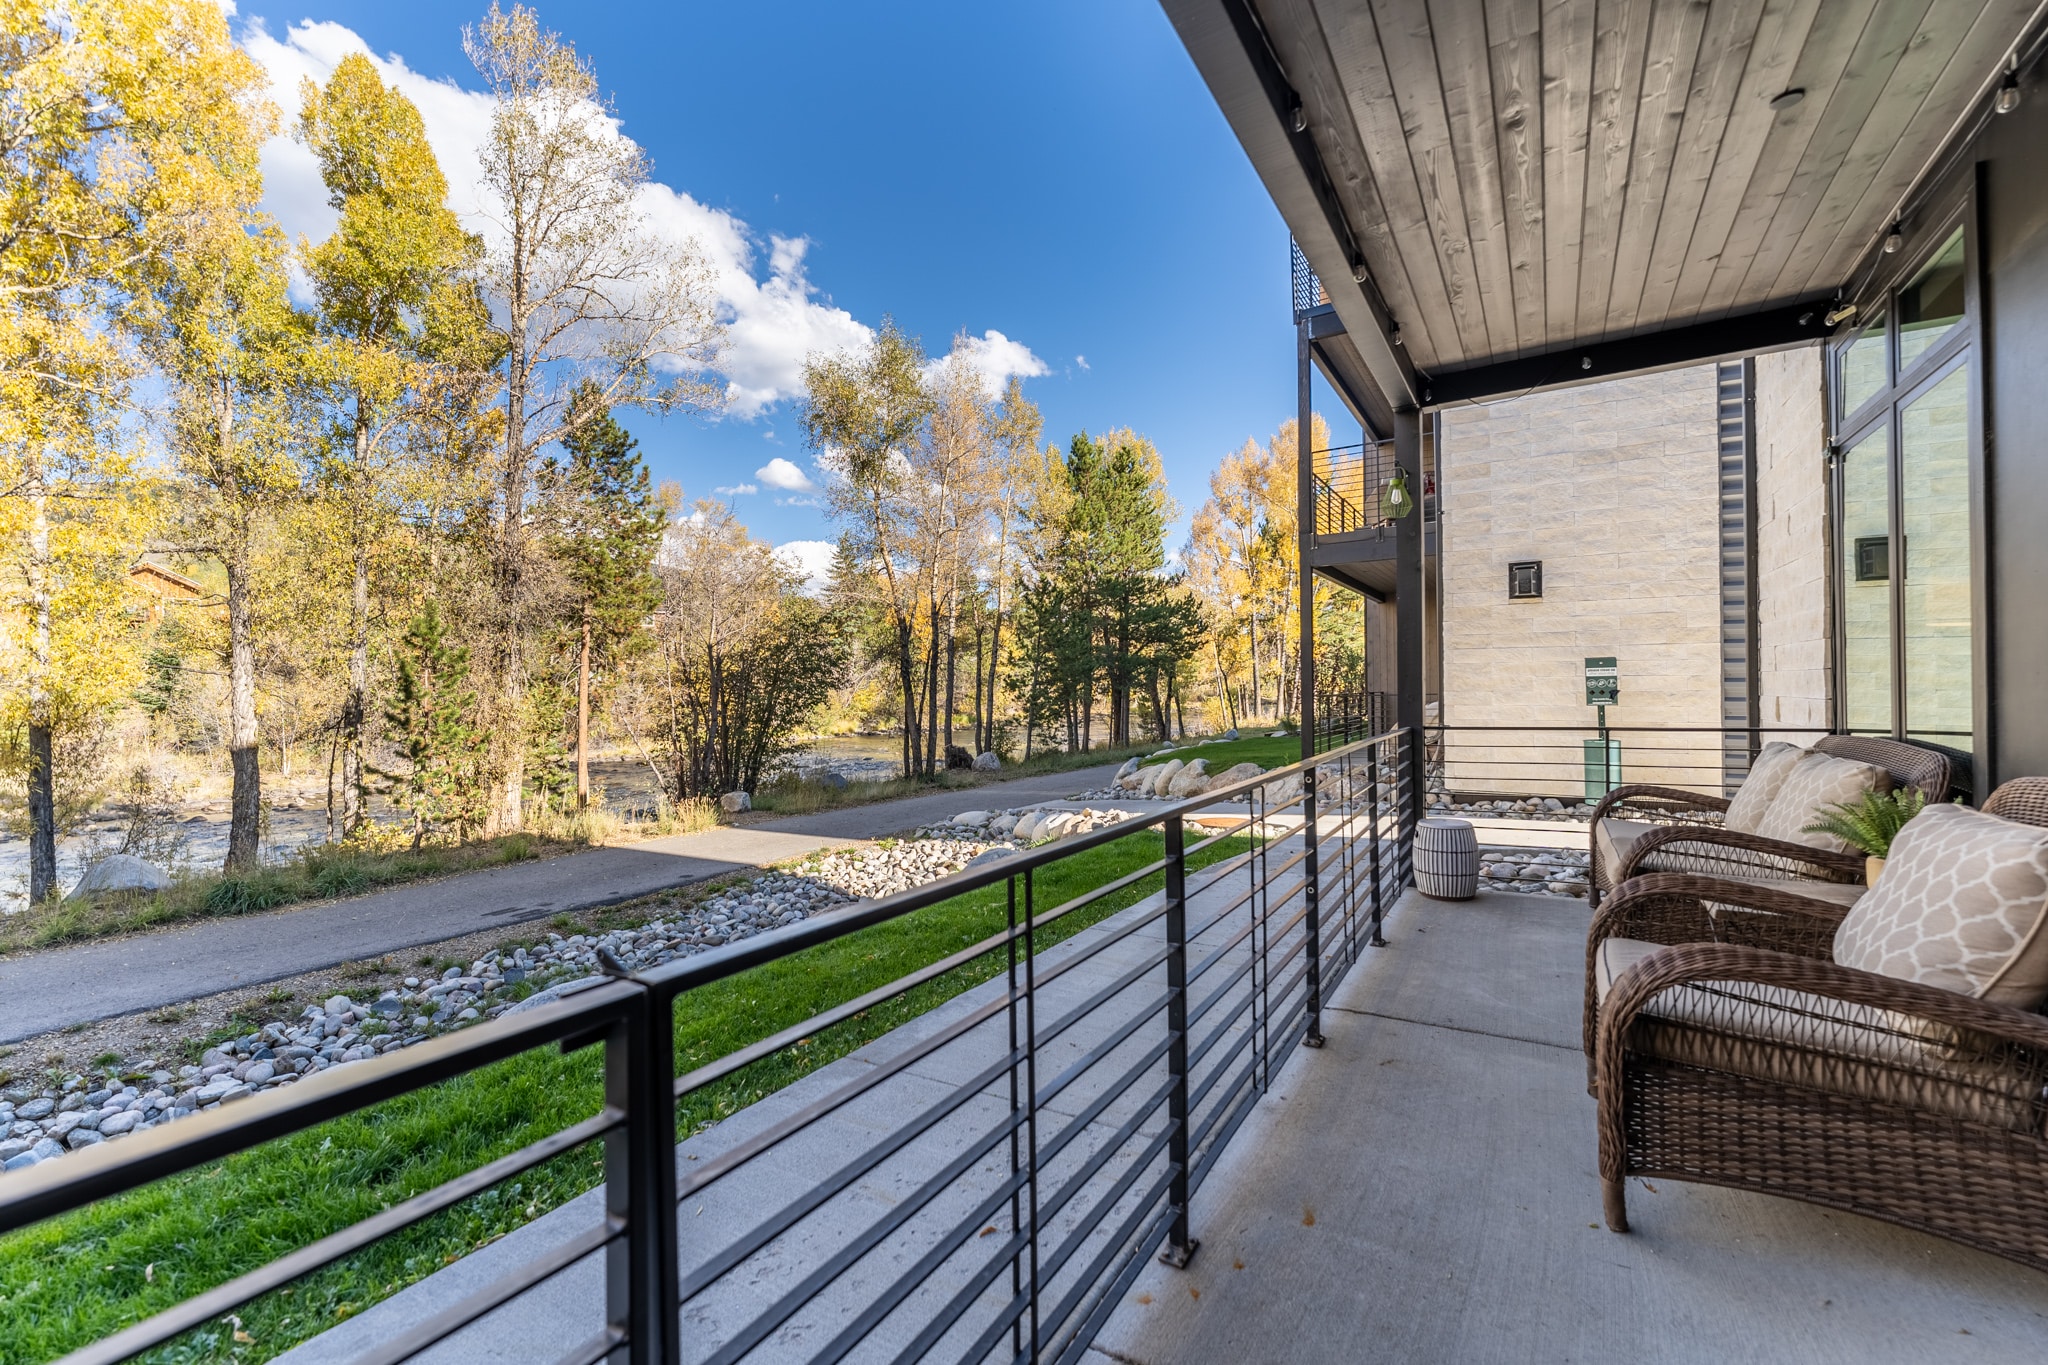 Balcony offering seating and a gas grill with views of Snake River.